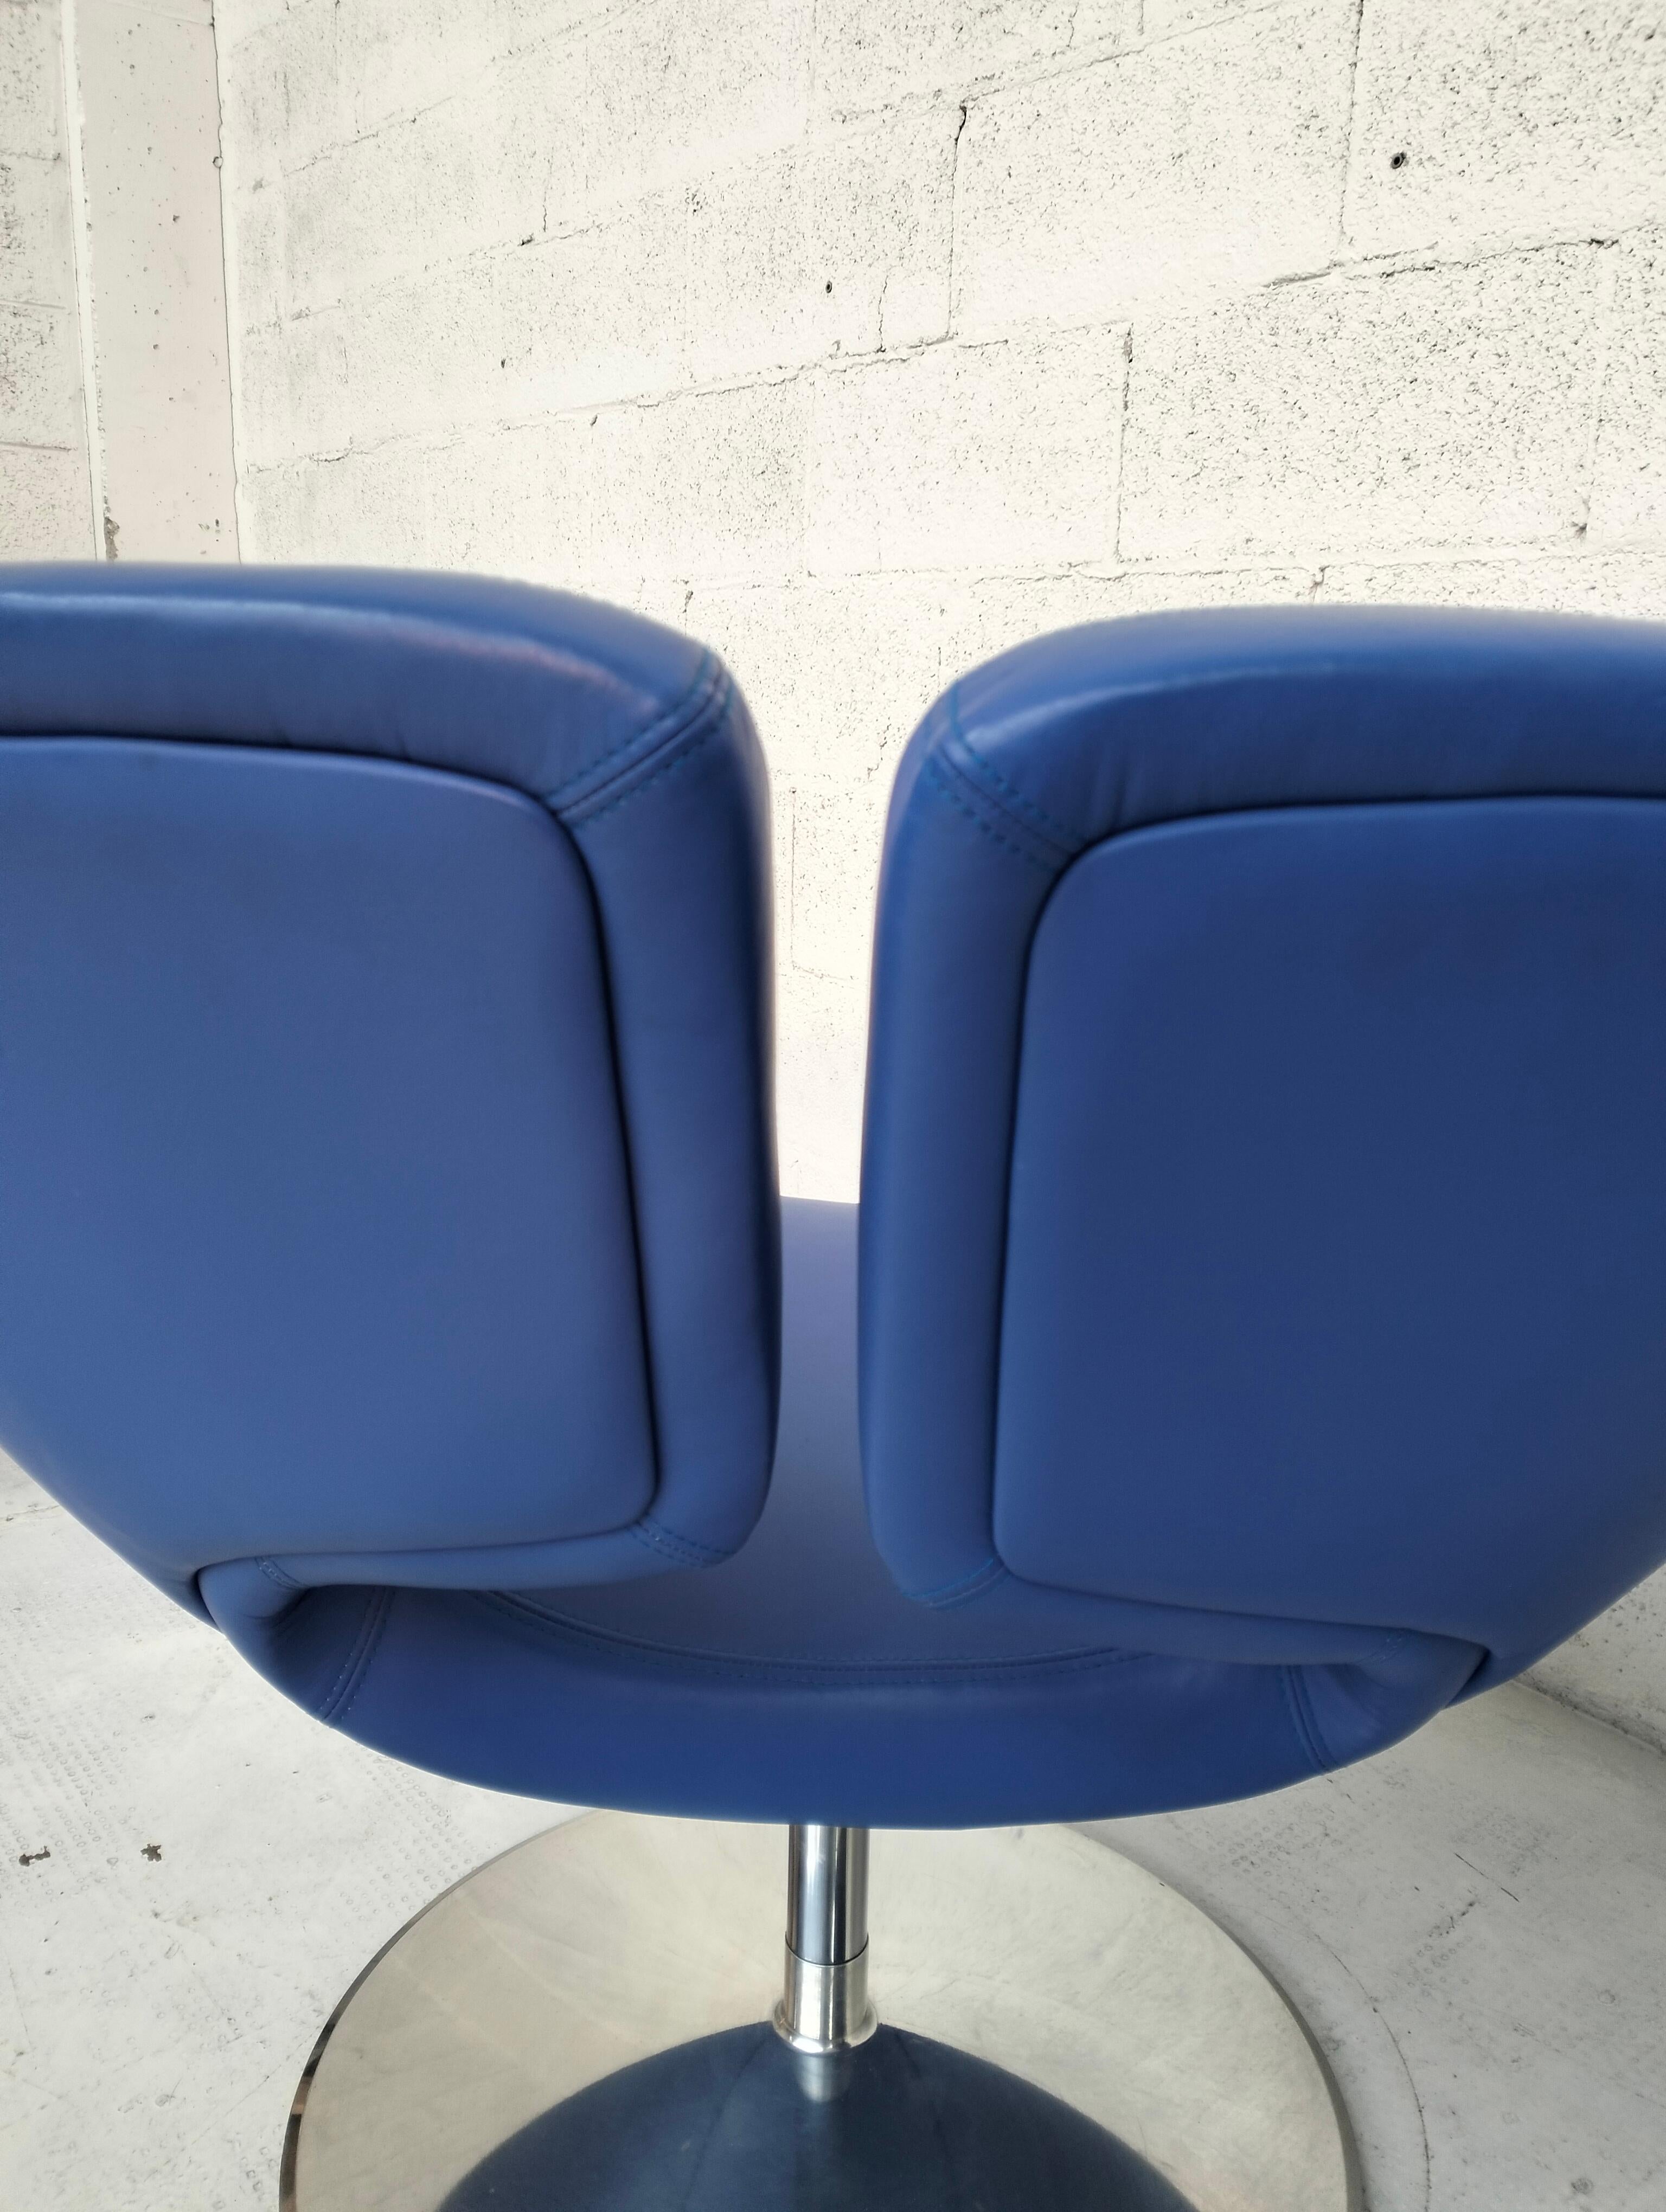 Pair of swivel Apollo lounge chairs by Patrick Norguet for Artifort 2000s For Sale 2